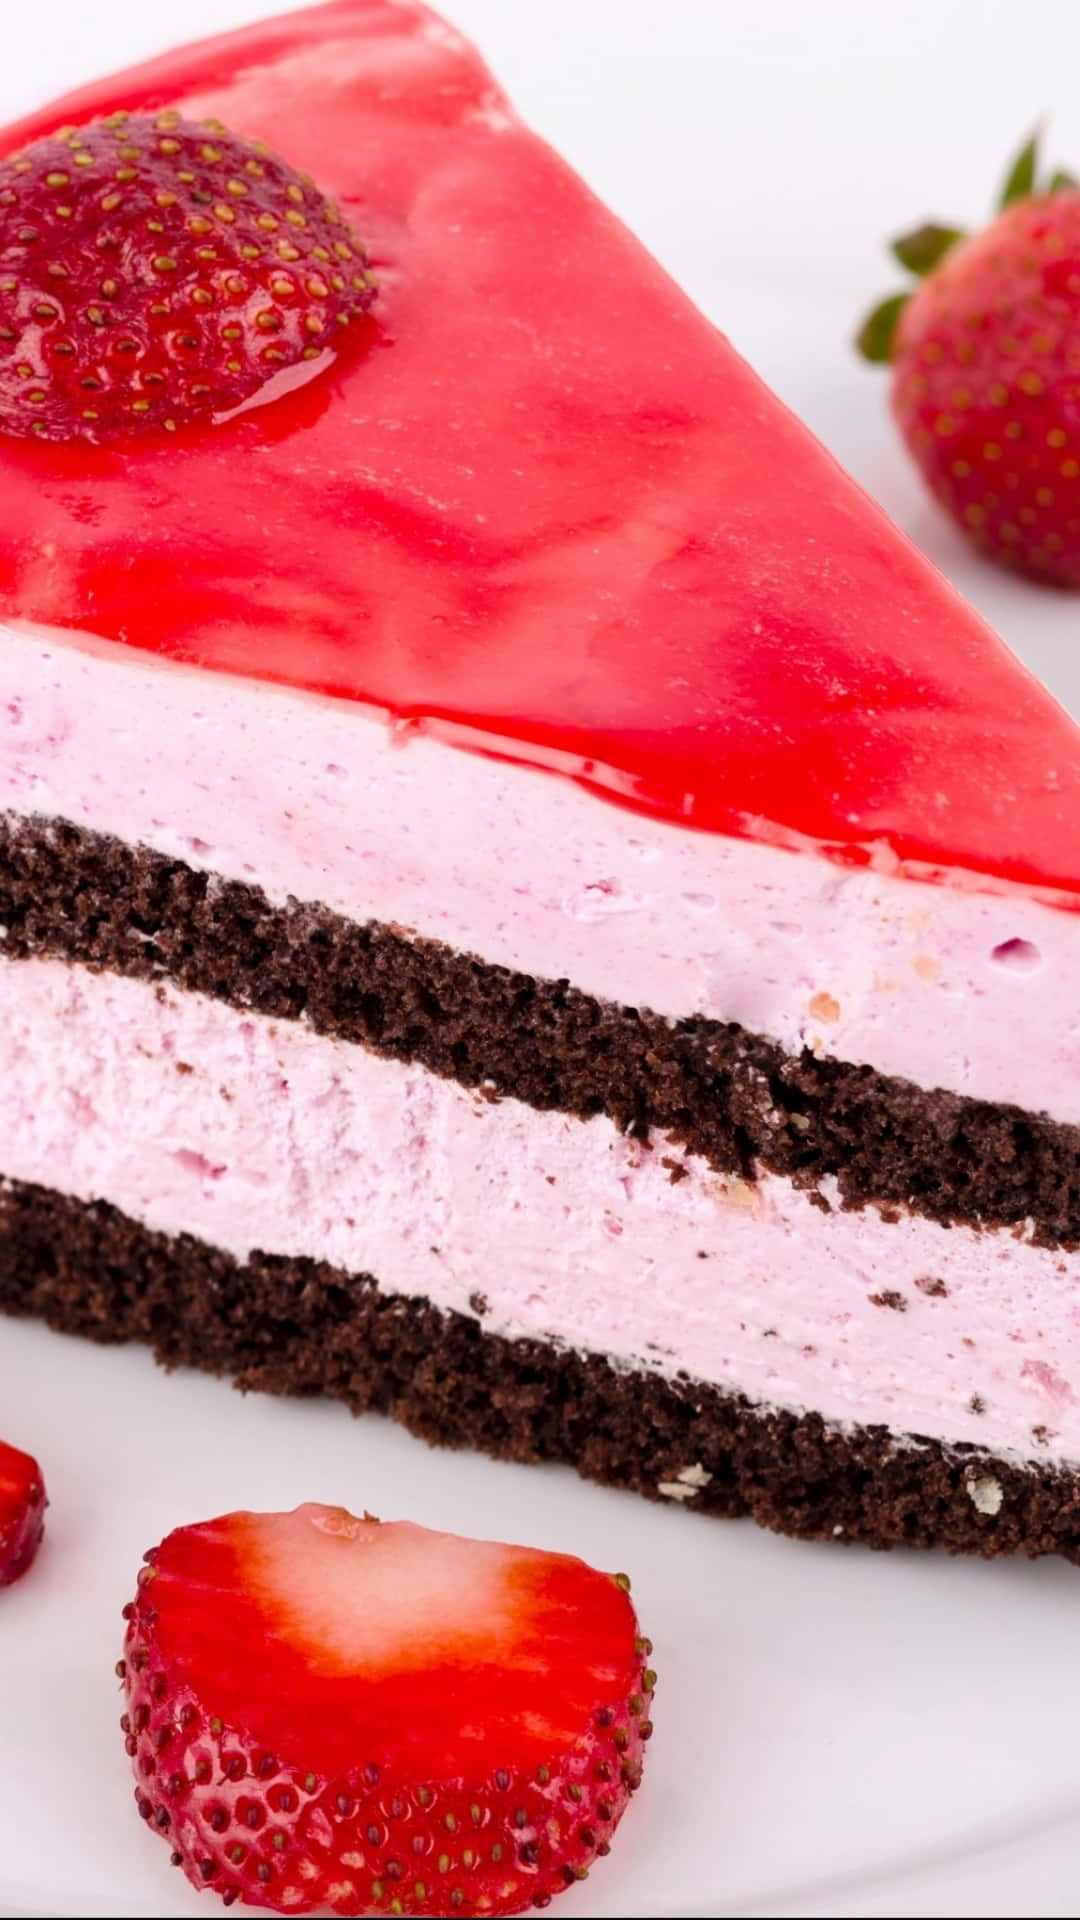 A Slice Of Strawberry Cake With Strawberries On Top Wallpaper